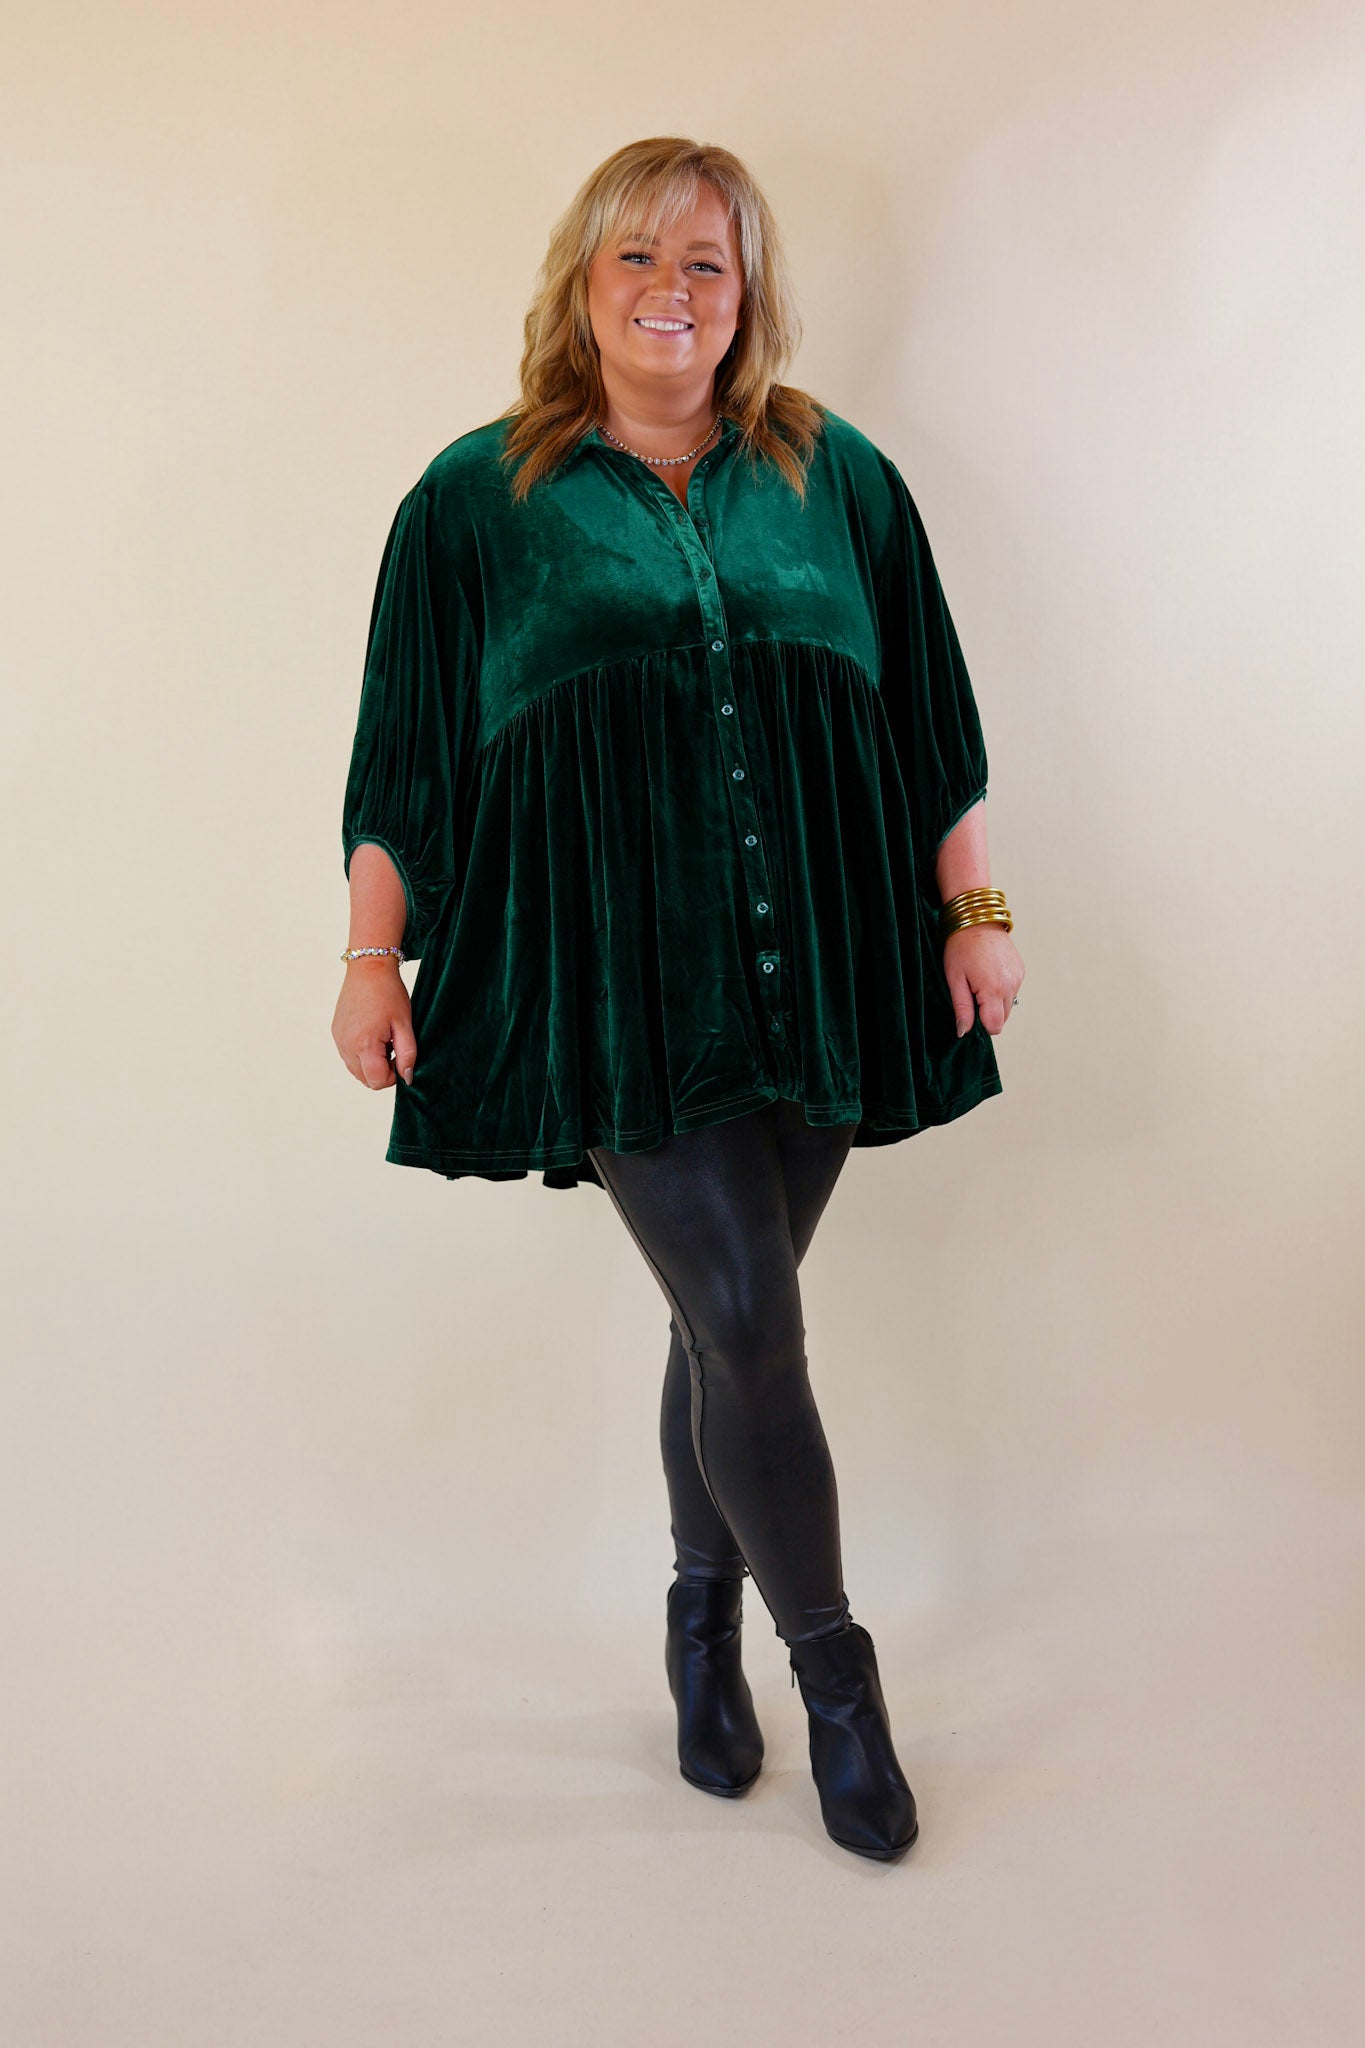 Love Link Button Up Velvet Half Sleeve Babydoll Tunic Top in Emerald Green - Giddy Up Glamour Boutique